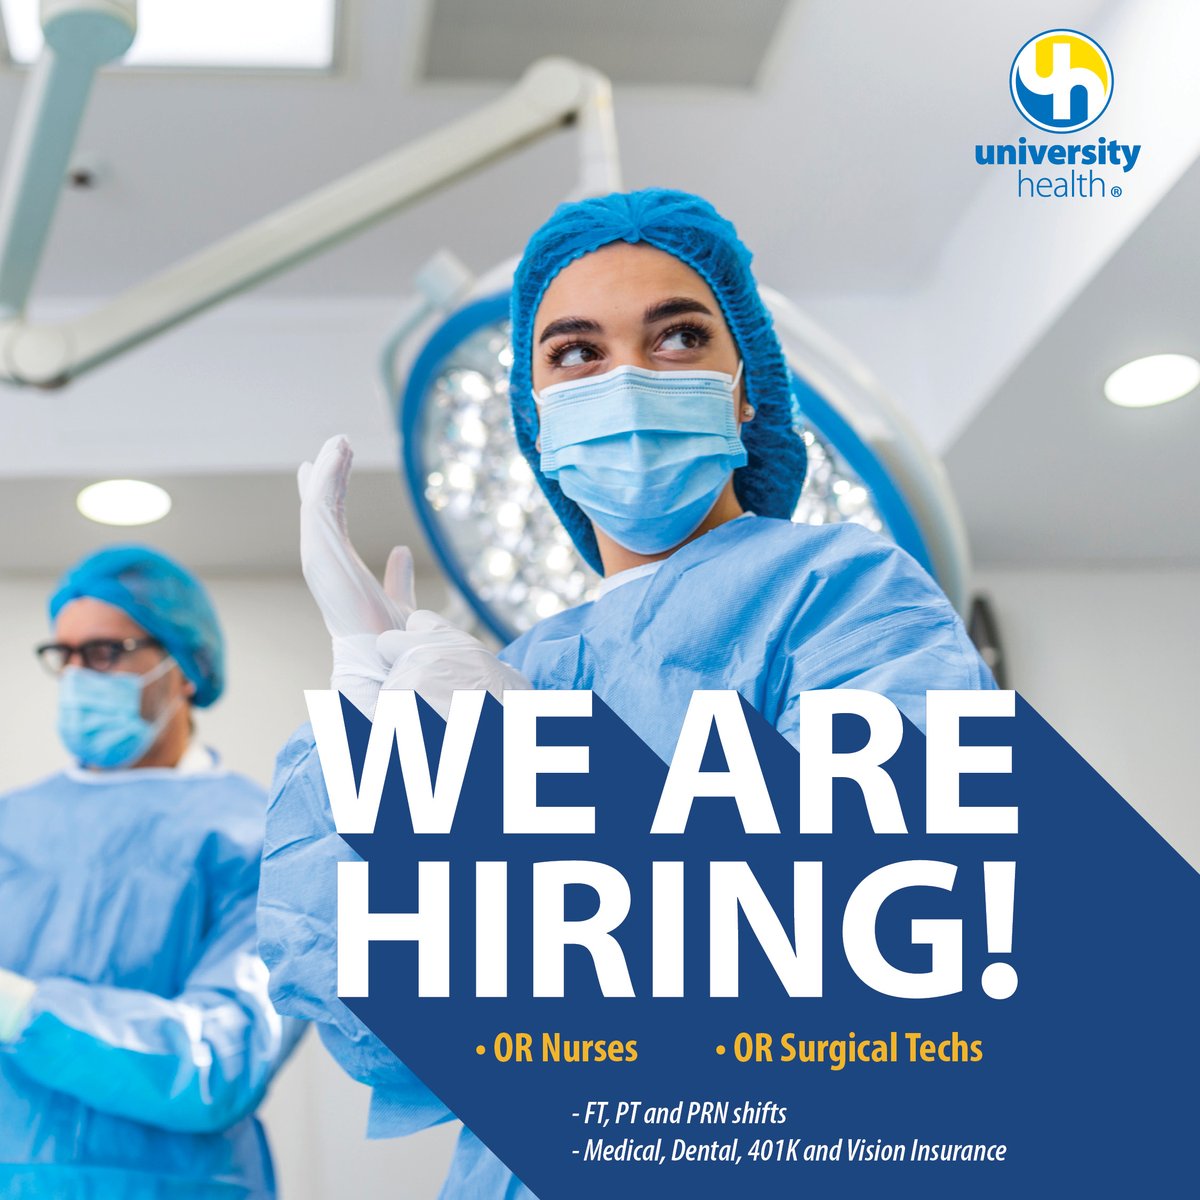 Healthcare with heart! Now hiring! 💛💙 @UHKCMO currently has openings for experienced OR Nurses and Surgical Techs. Flexible shifts and full benefits. Join Kansas City’s essential hospital, where we put people above profit. Apply today! 👉bit.ly/hotjobs2024